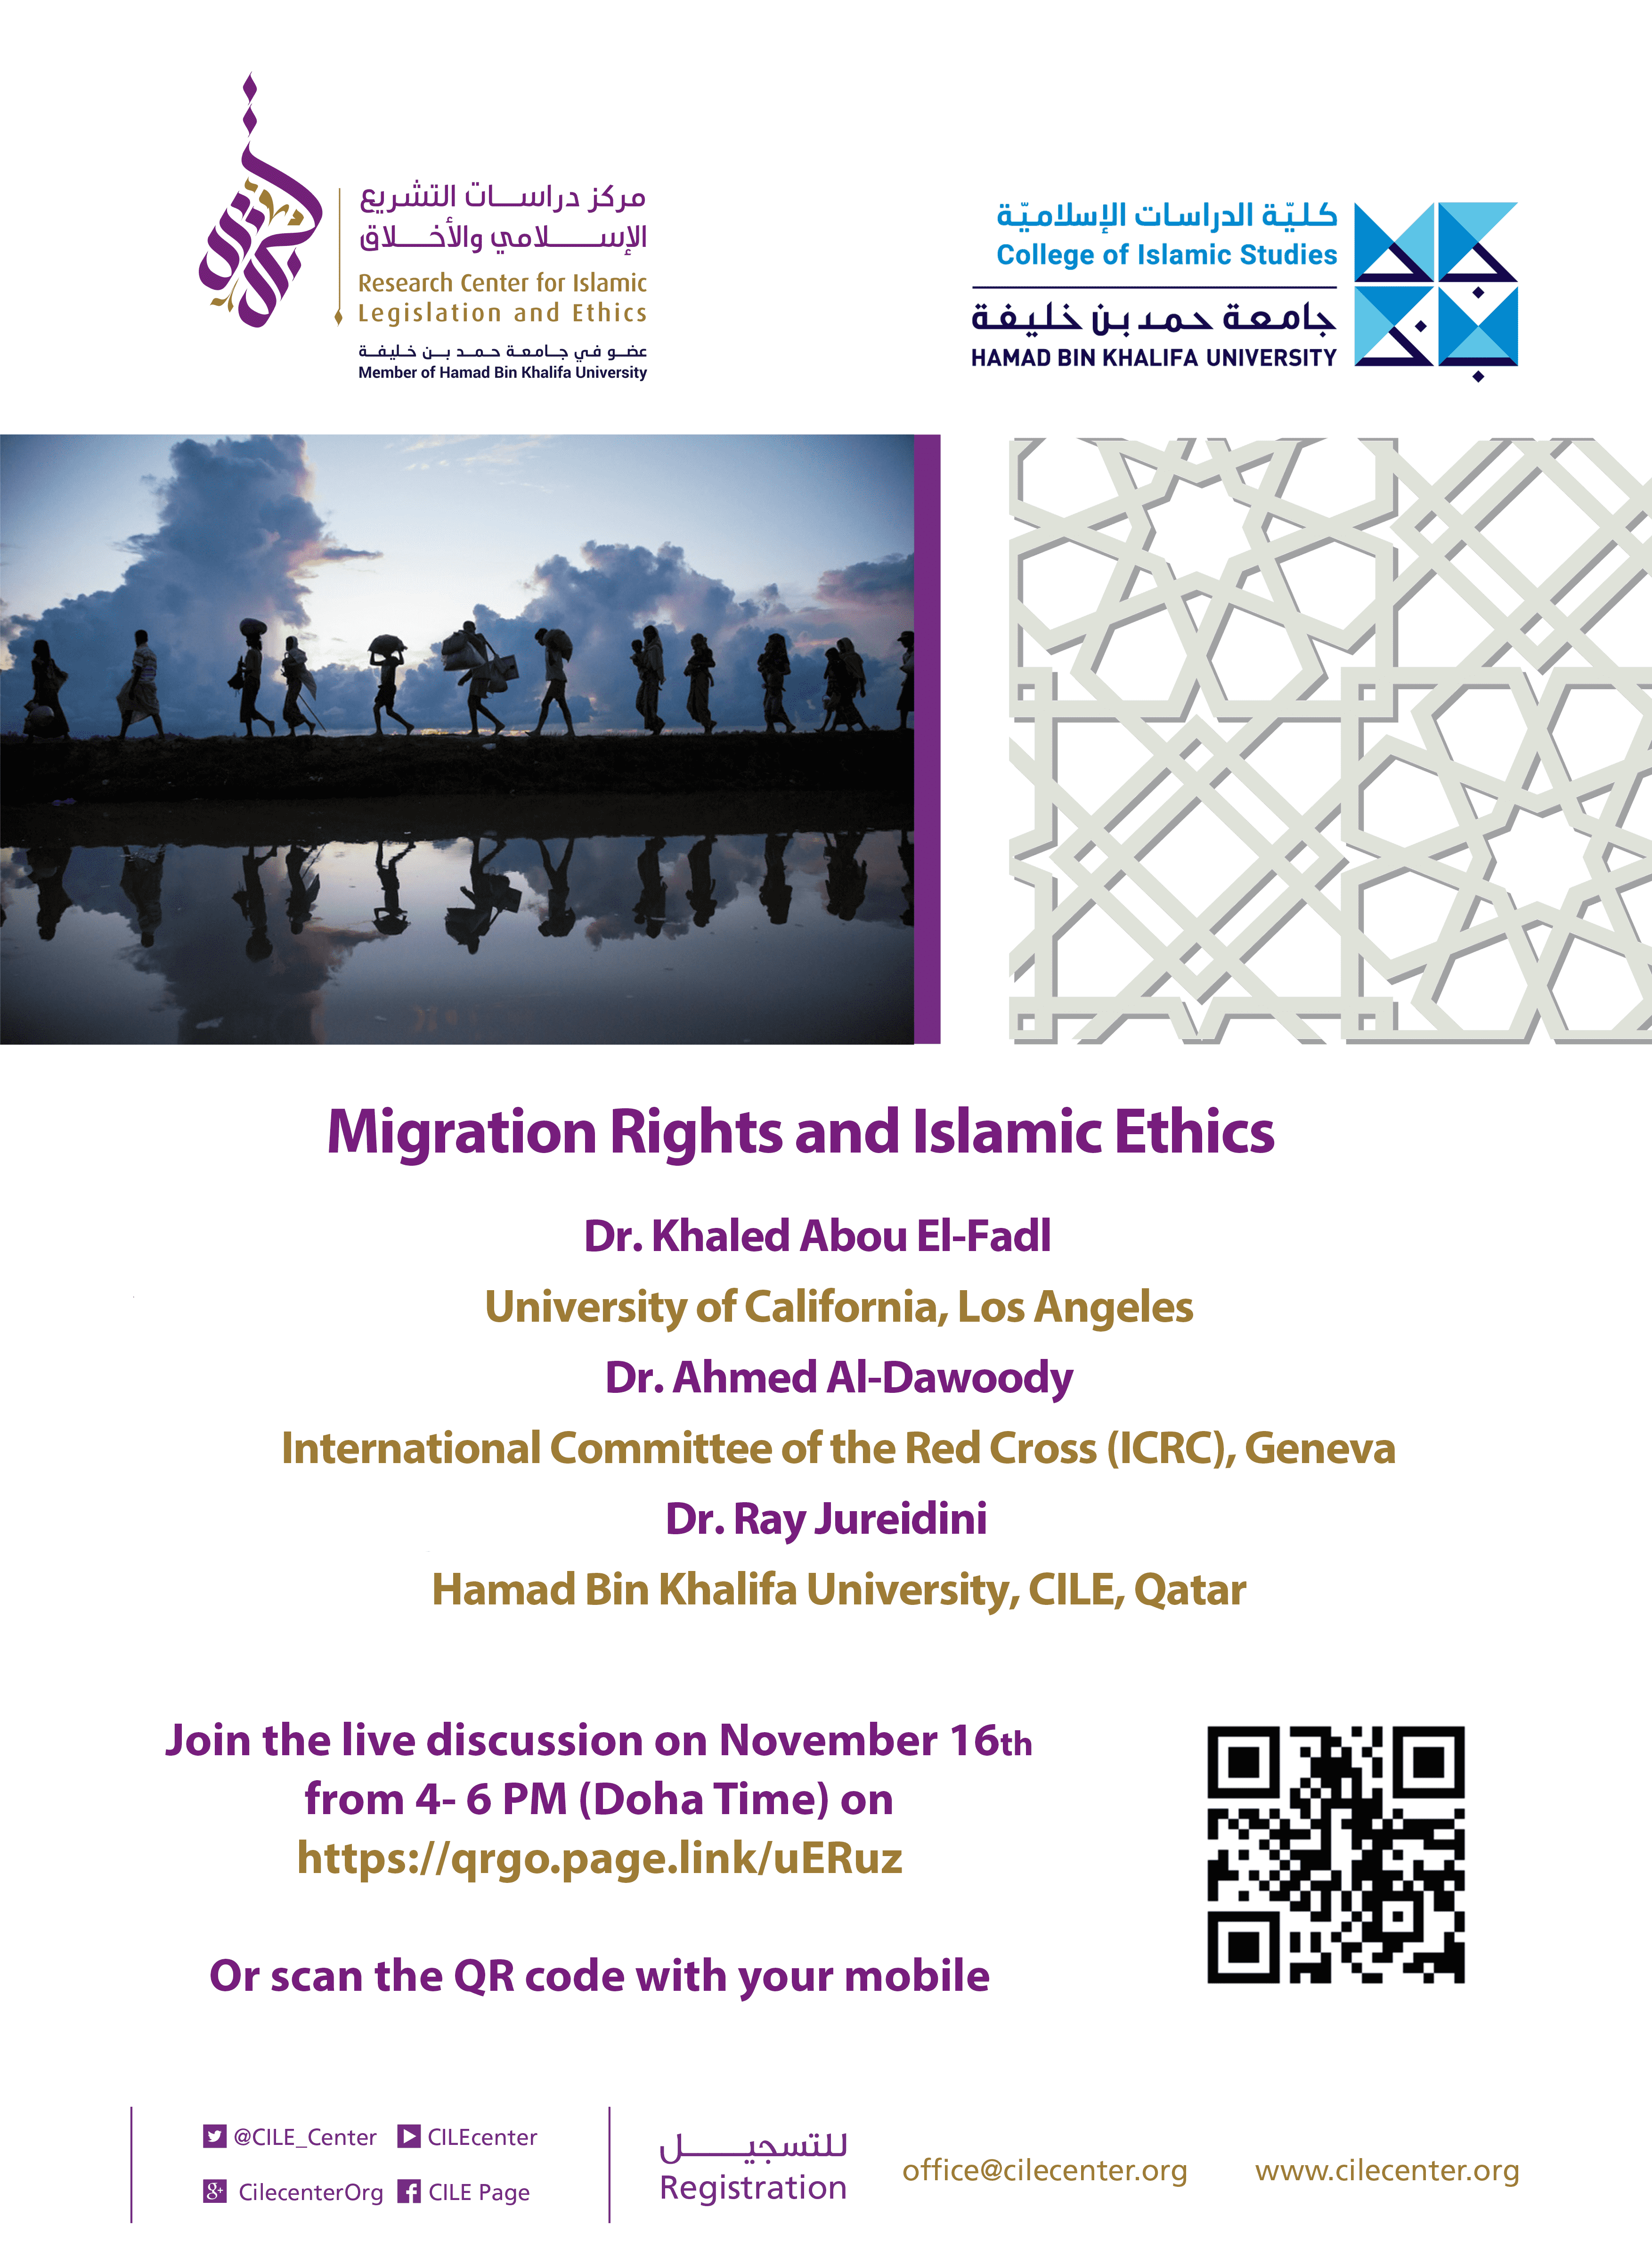 Lecture on Migration Rights and Islamic Ethics